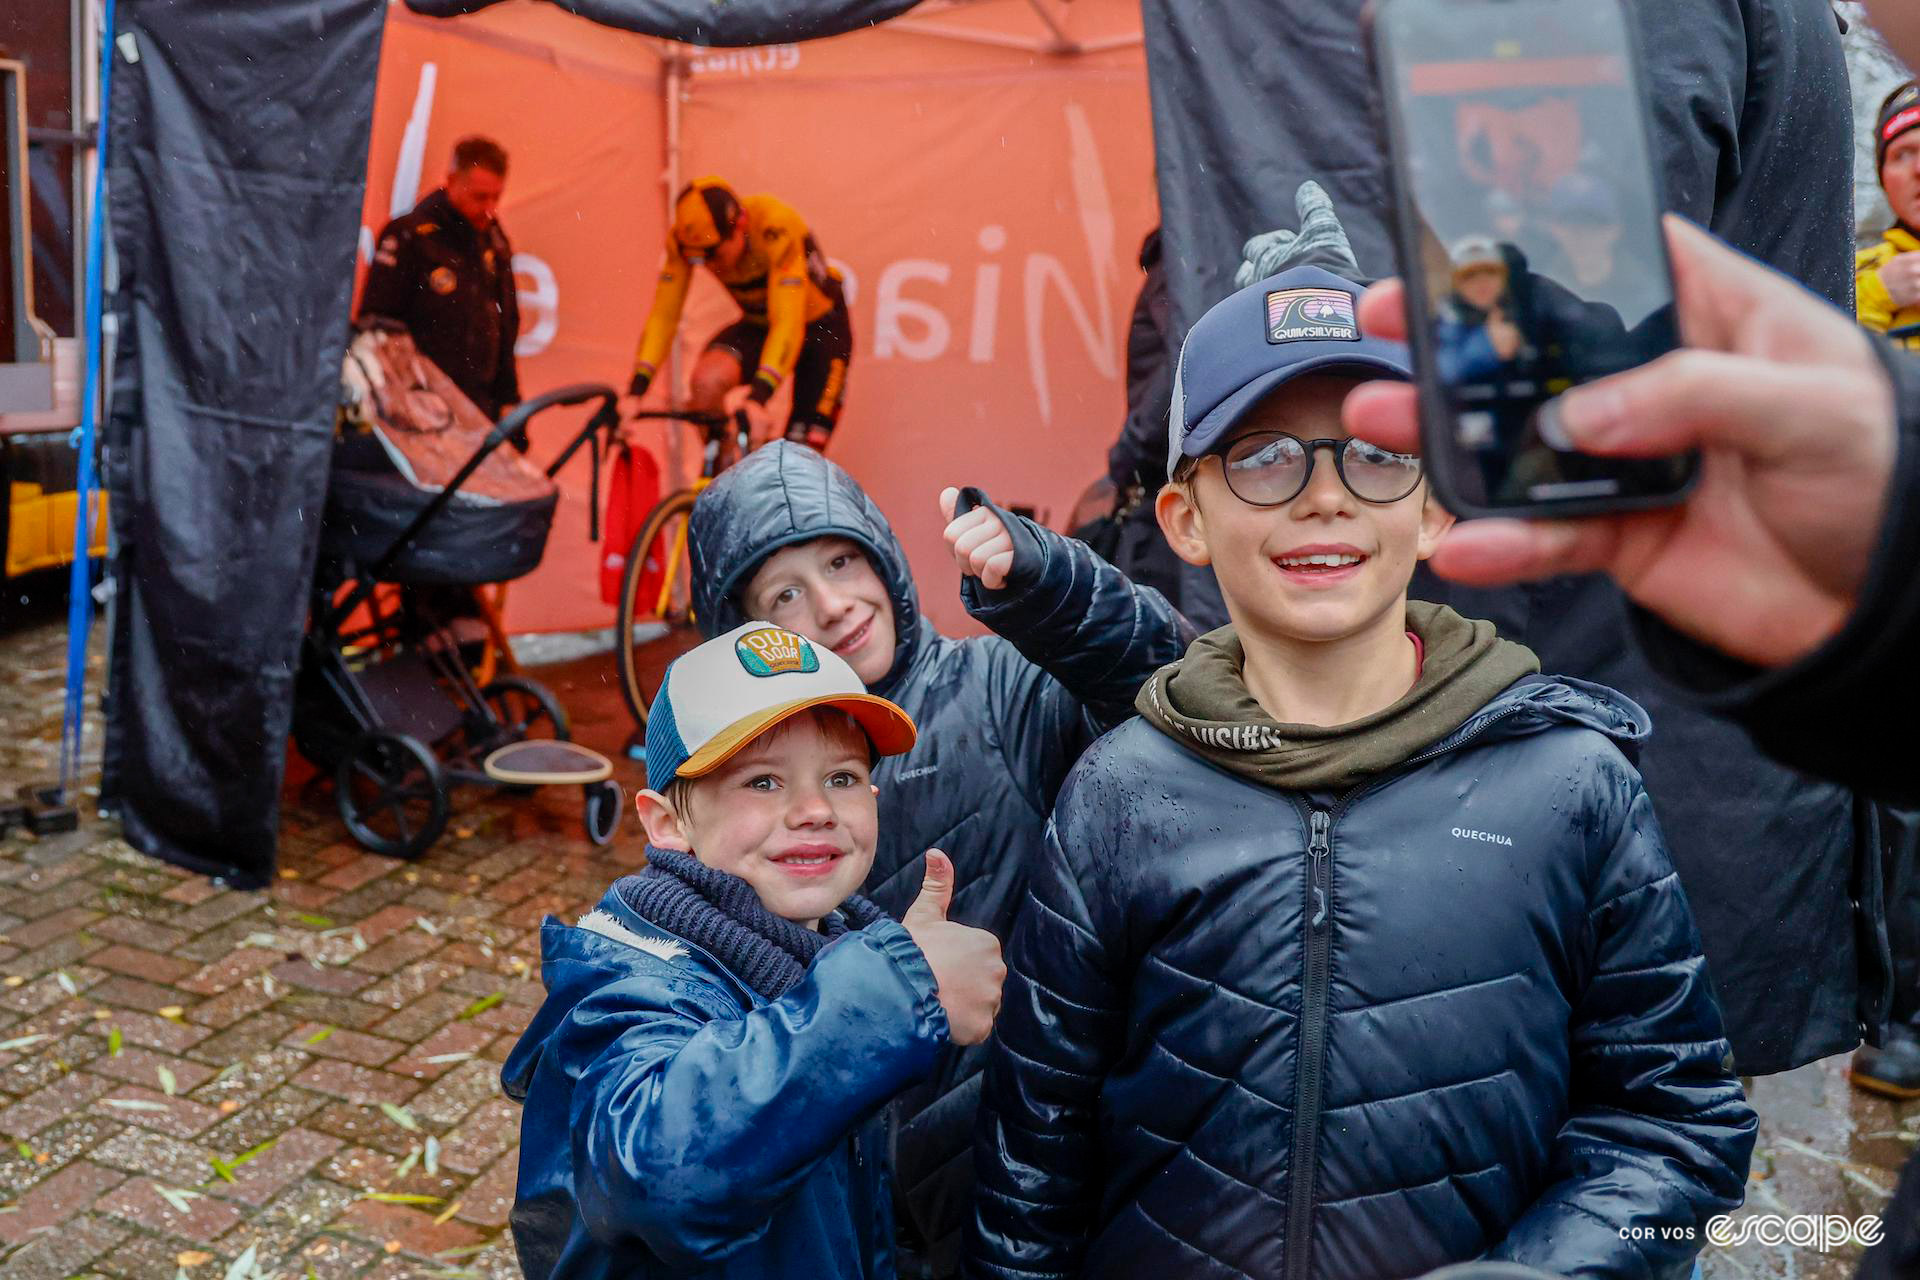 Wout van Aert in the background as young fans pose for a photograph at a very wet and muddy Exact Cross Essen.